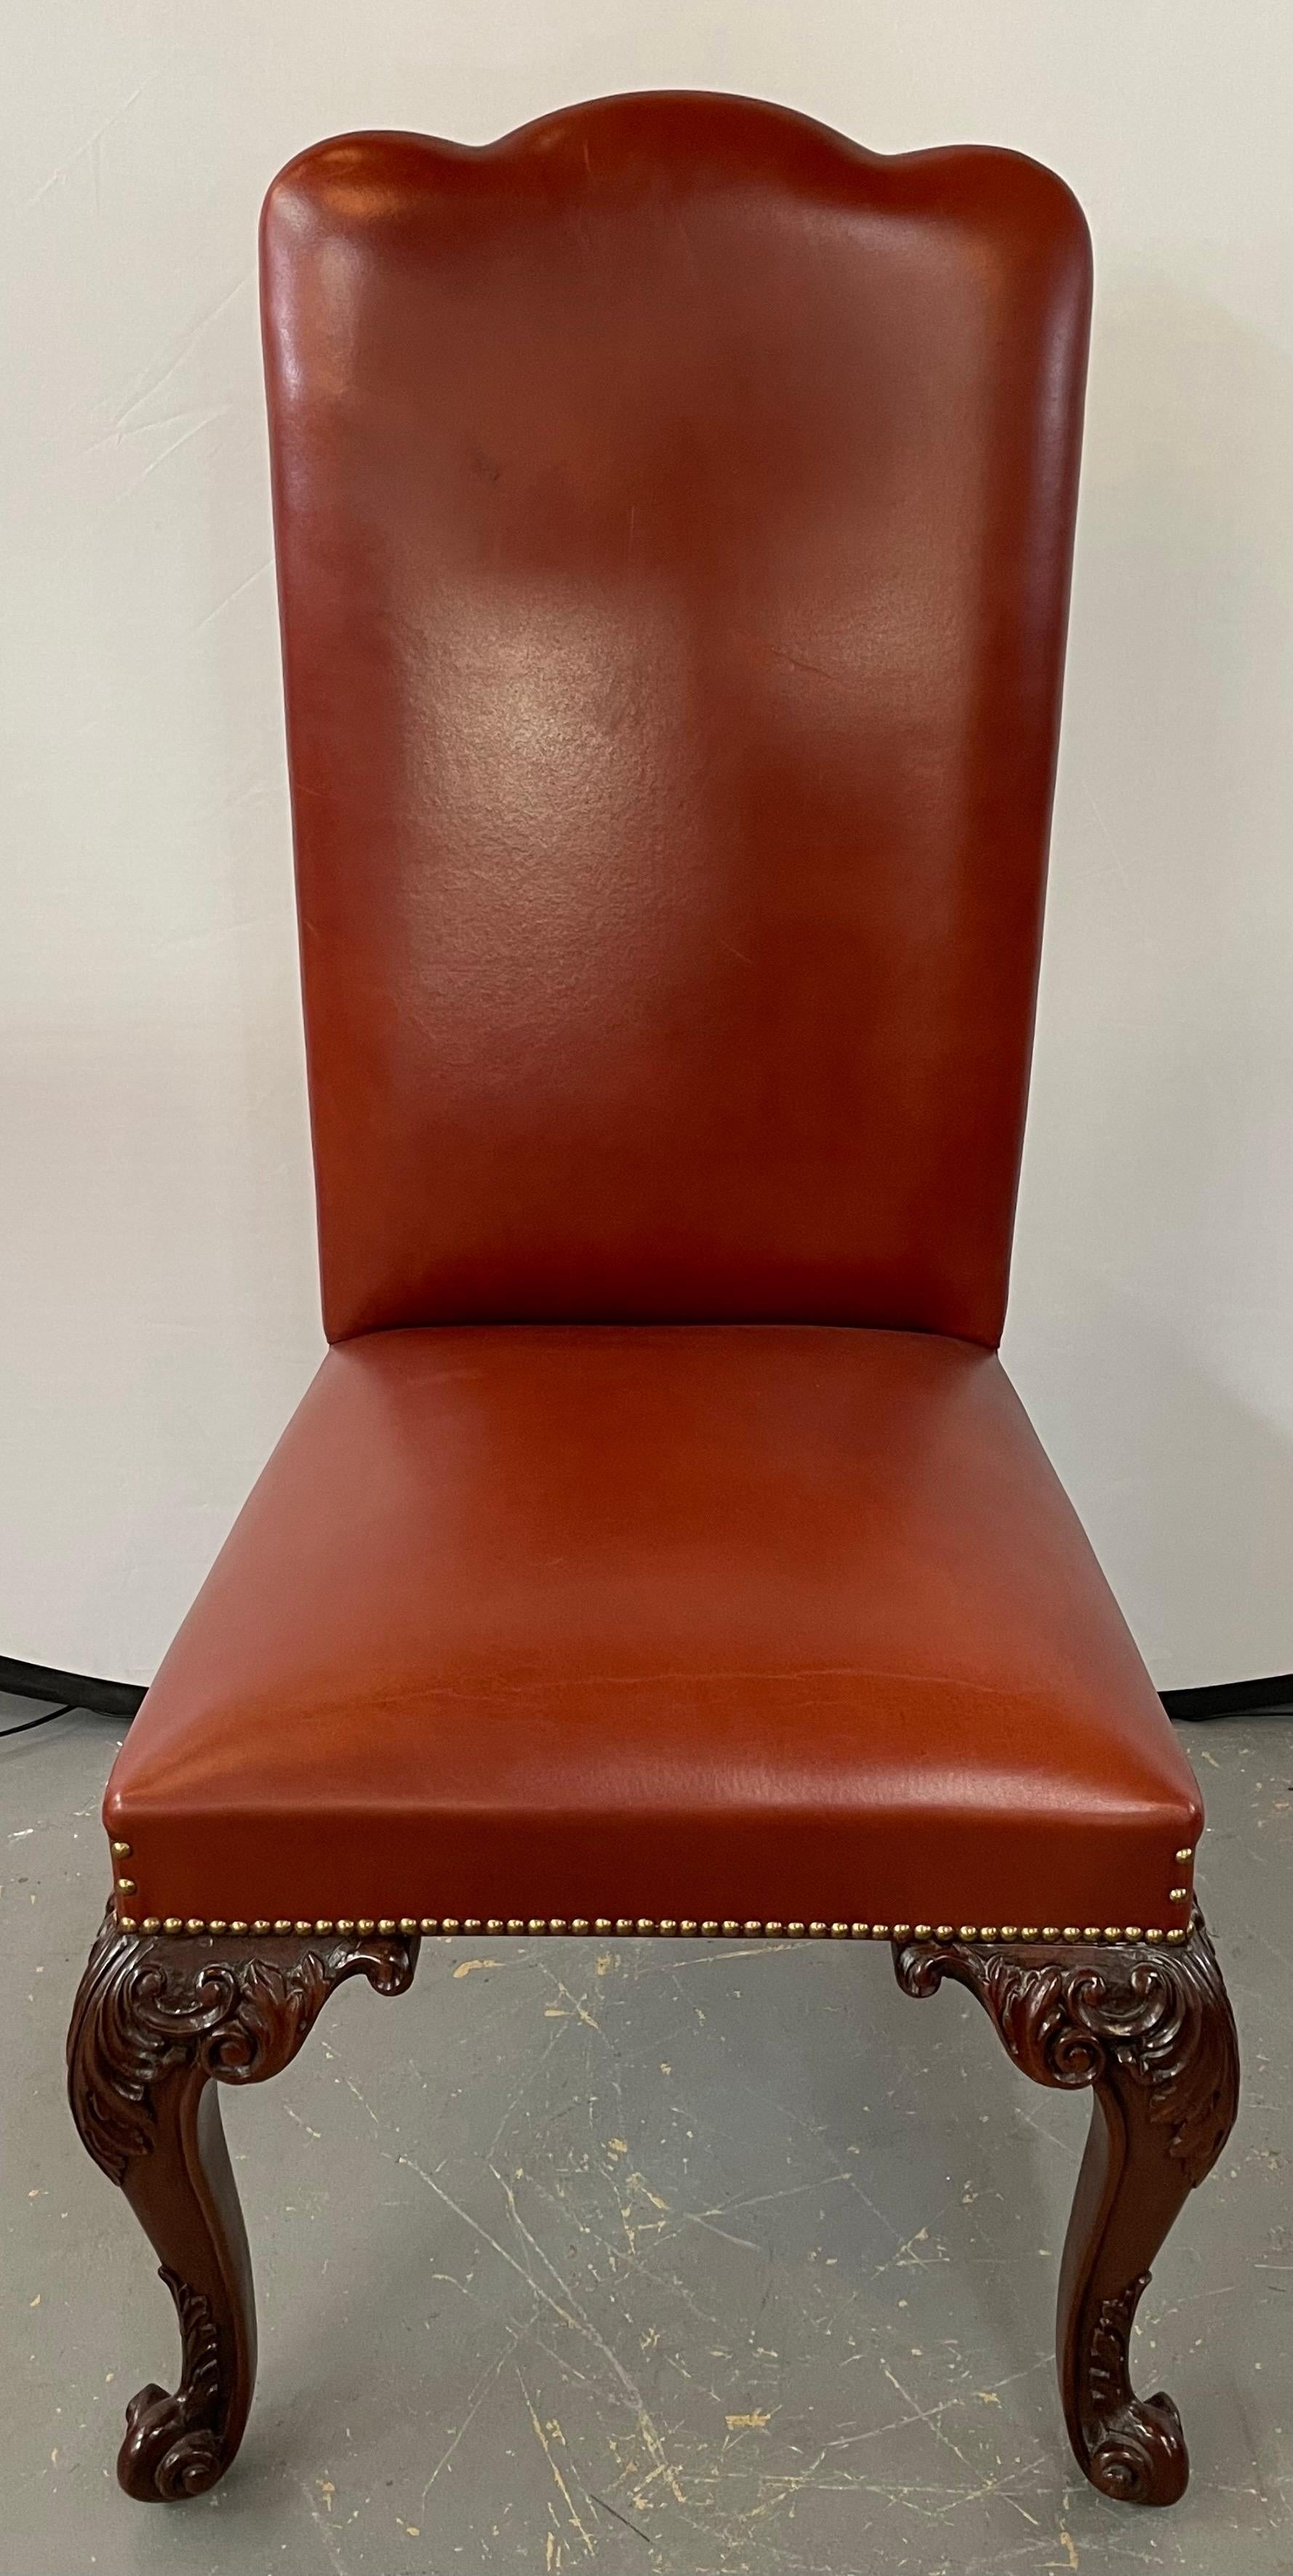 An exceptional high quality custom French Louis XV genuine leather dining chairs. Featuring a brown/ Maroon classy color, the chairs are finely hand carved in a cherry mahogany and showing acanthus and floral design. Each chair is supported by four